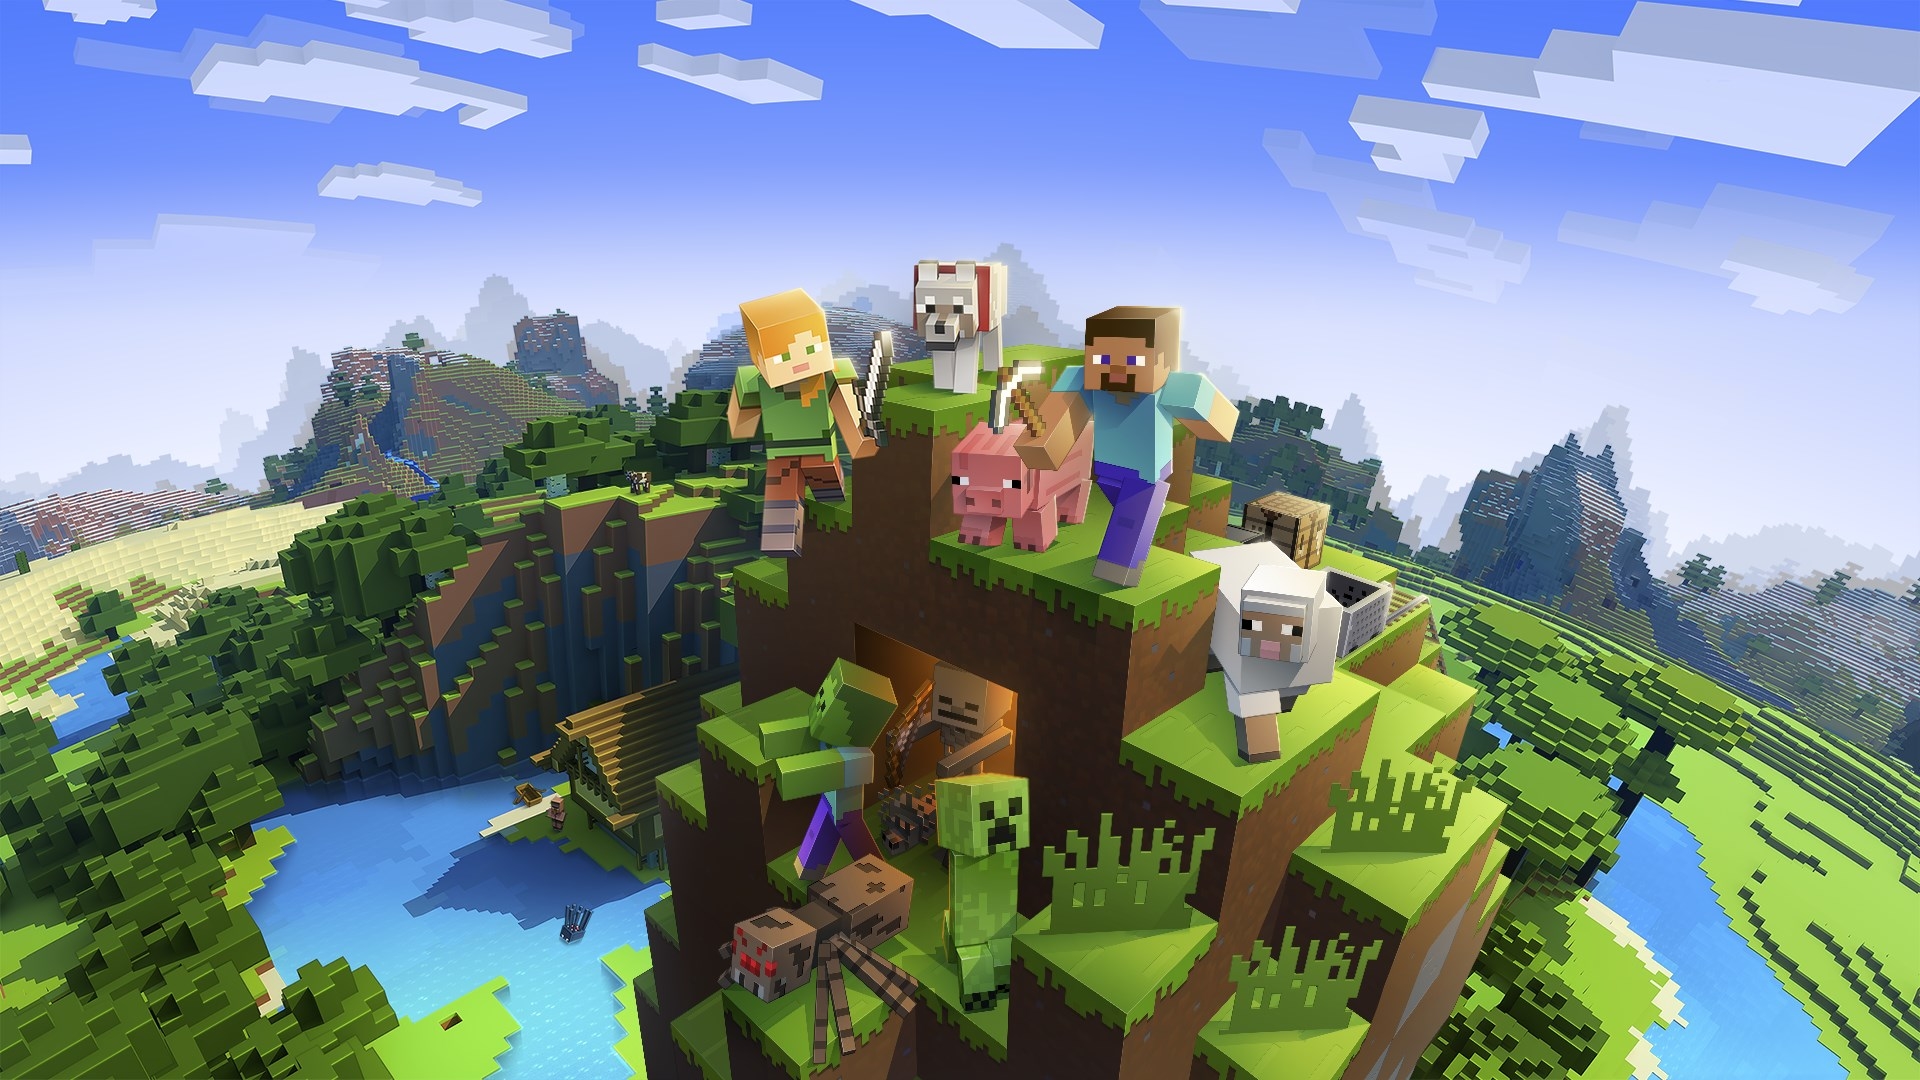 Minecraft 2 release date speculation, news, and mods